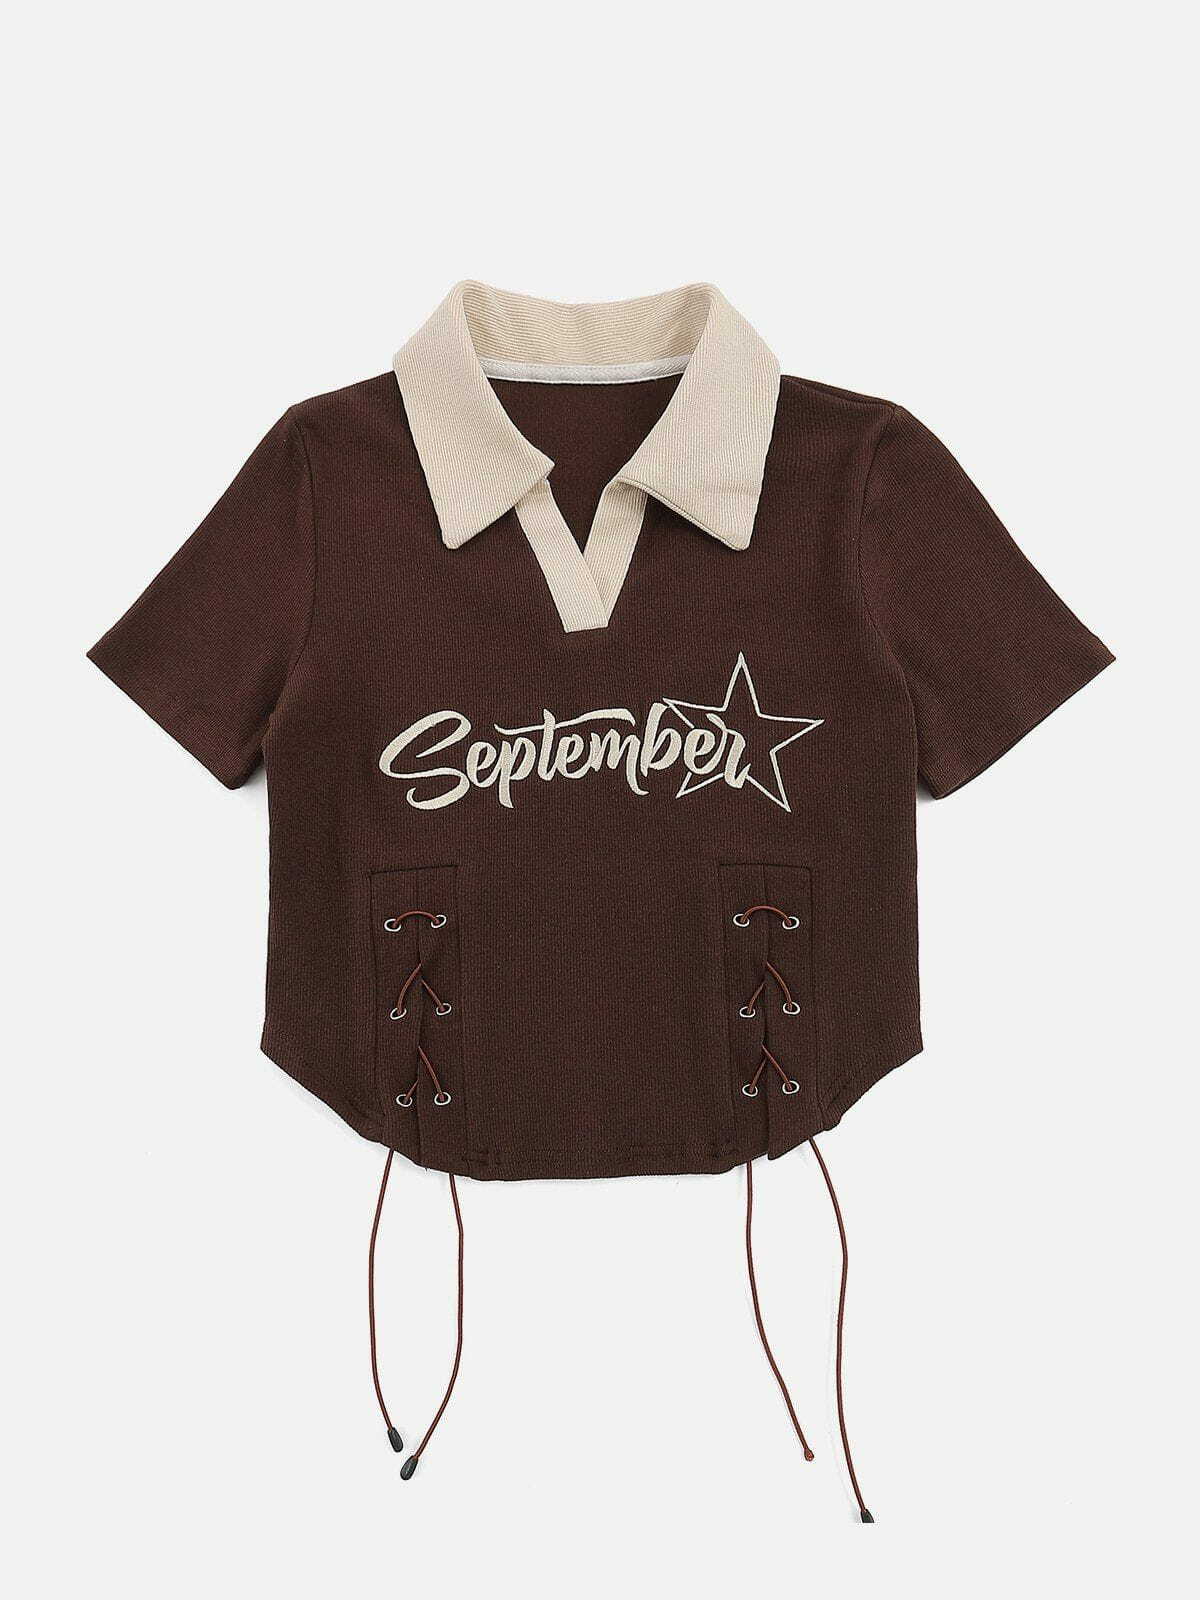 embroidered star tee edgy  retro streetwear essential 1690